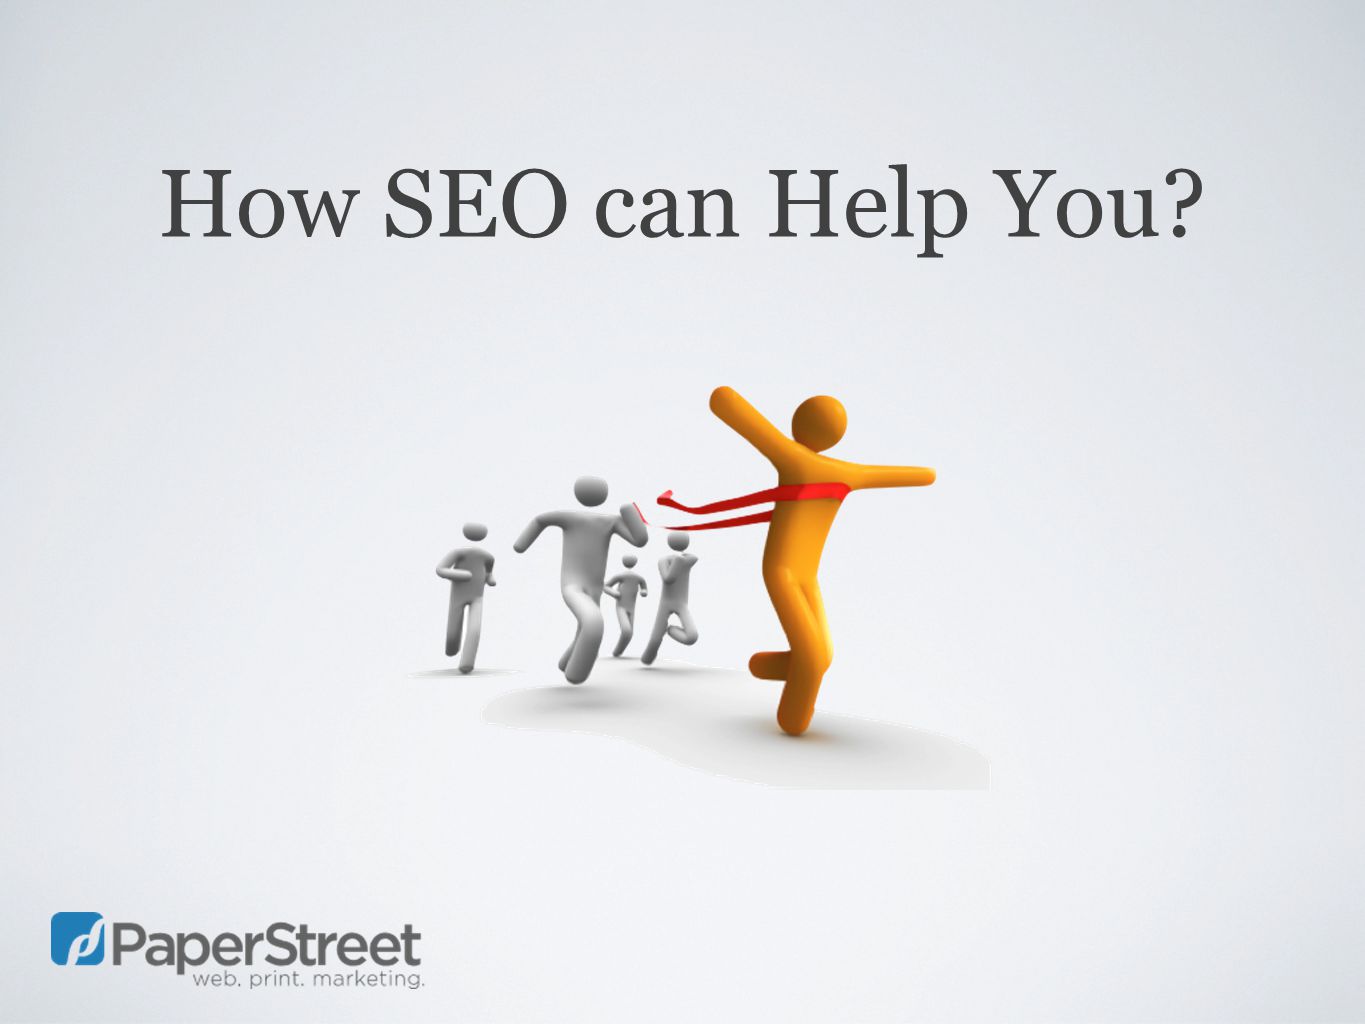 How SEO can Help You